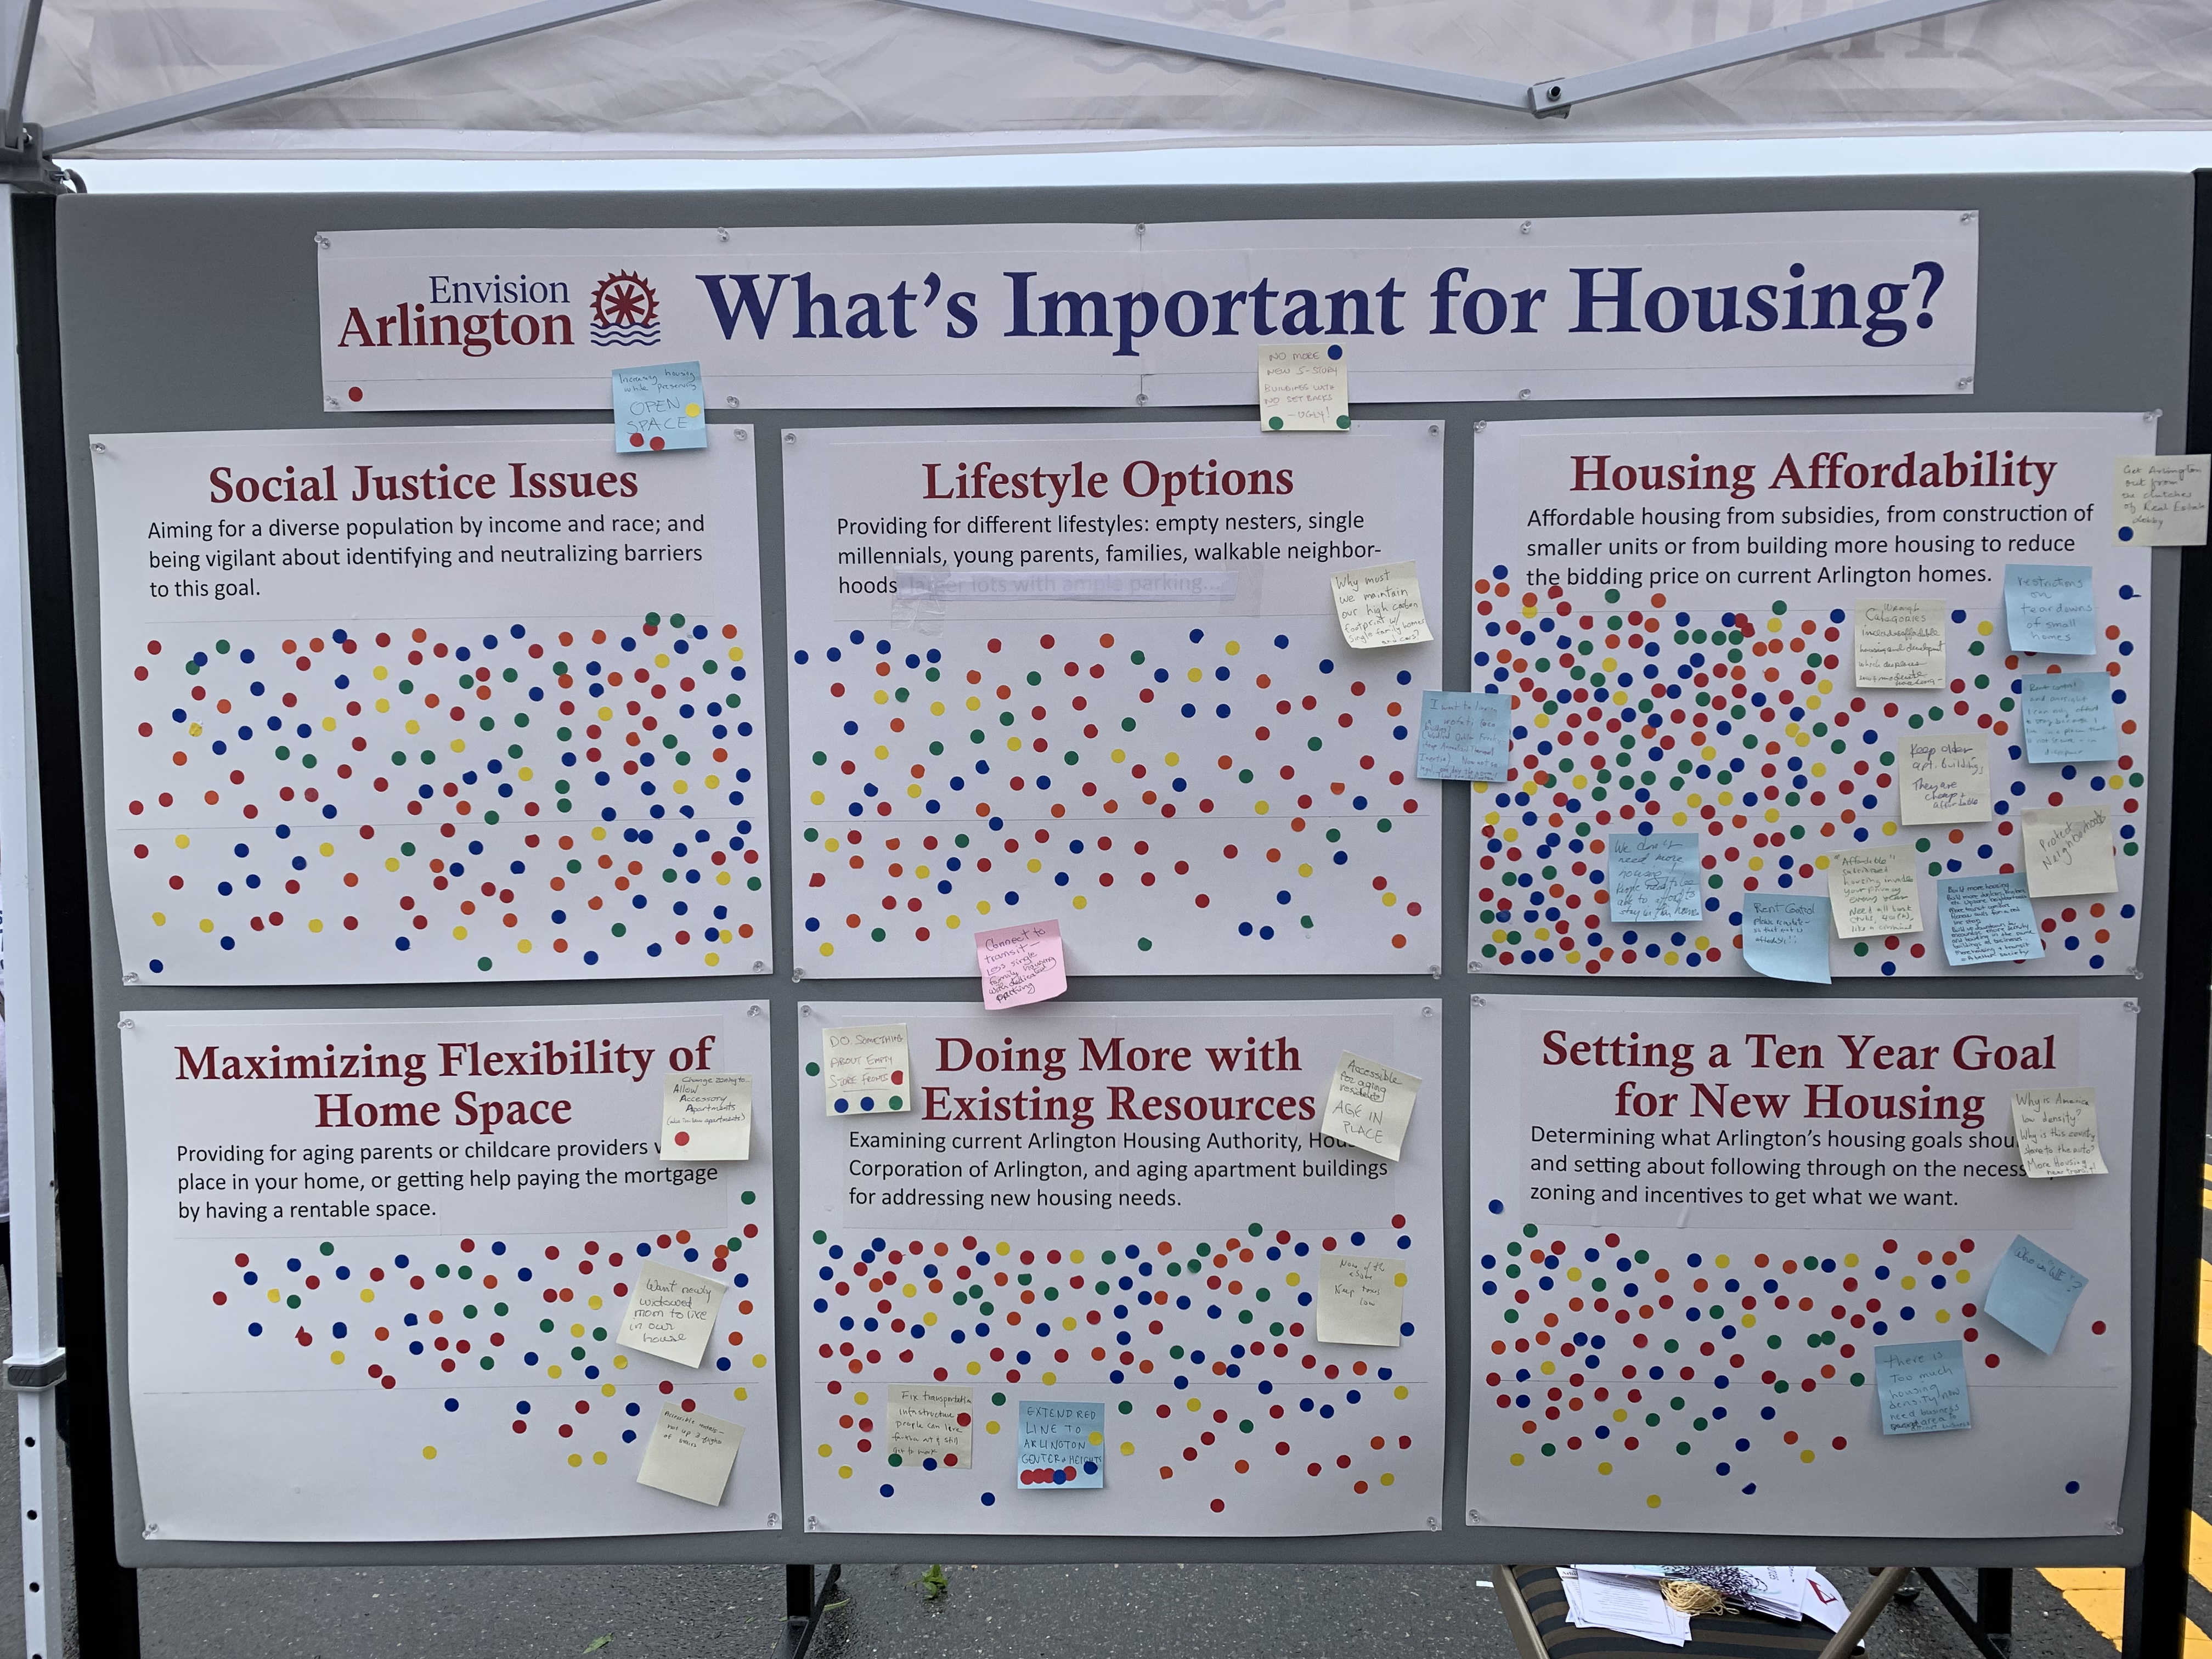 What's important for Housing